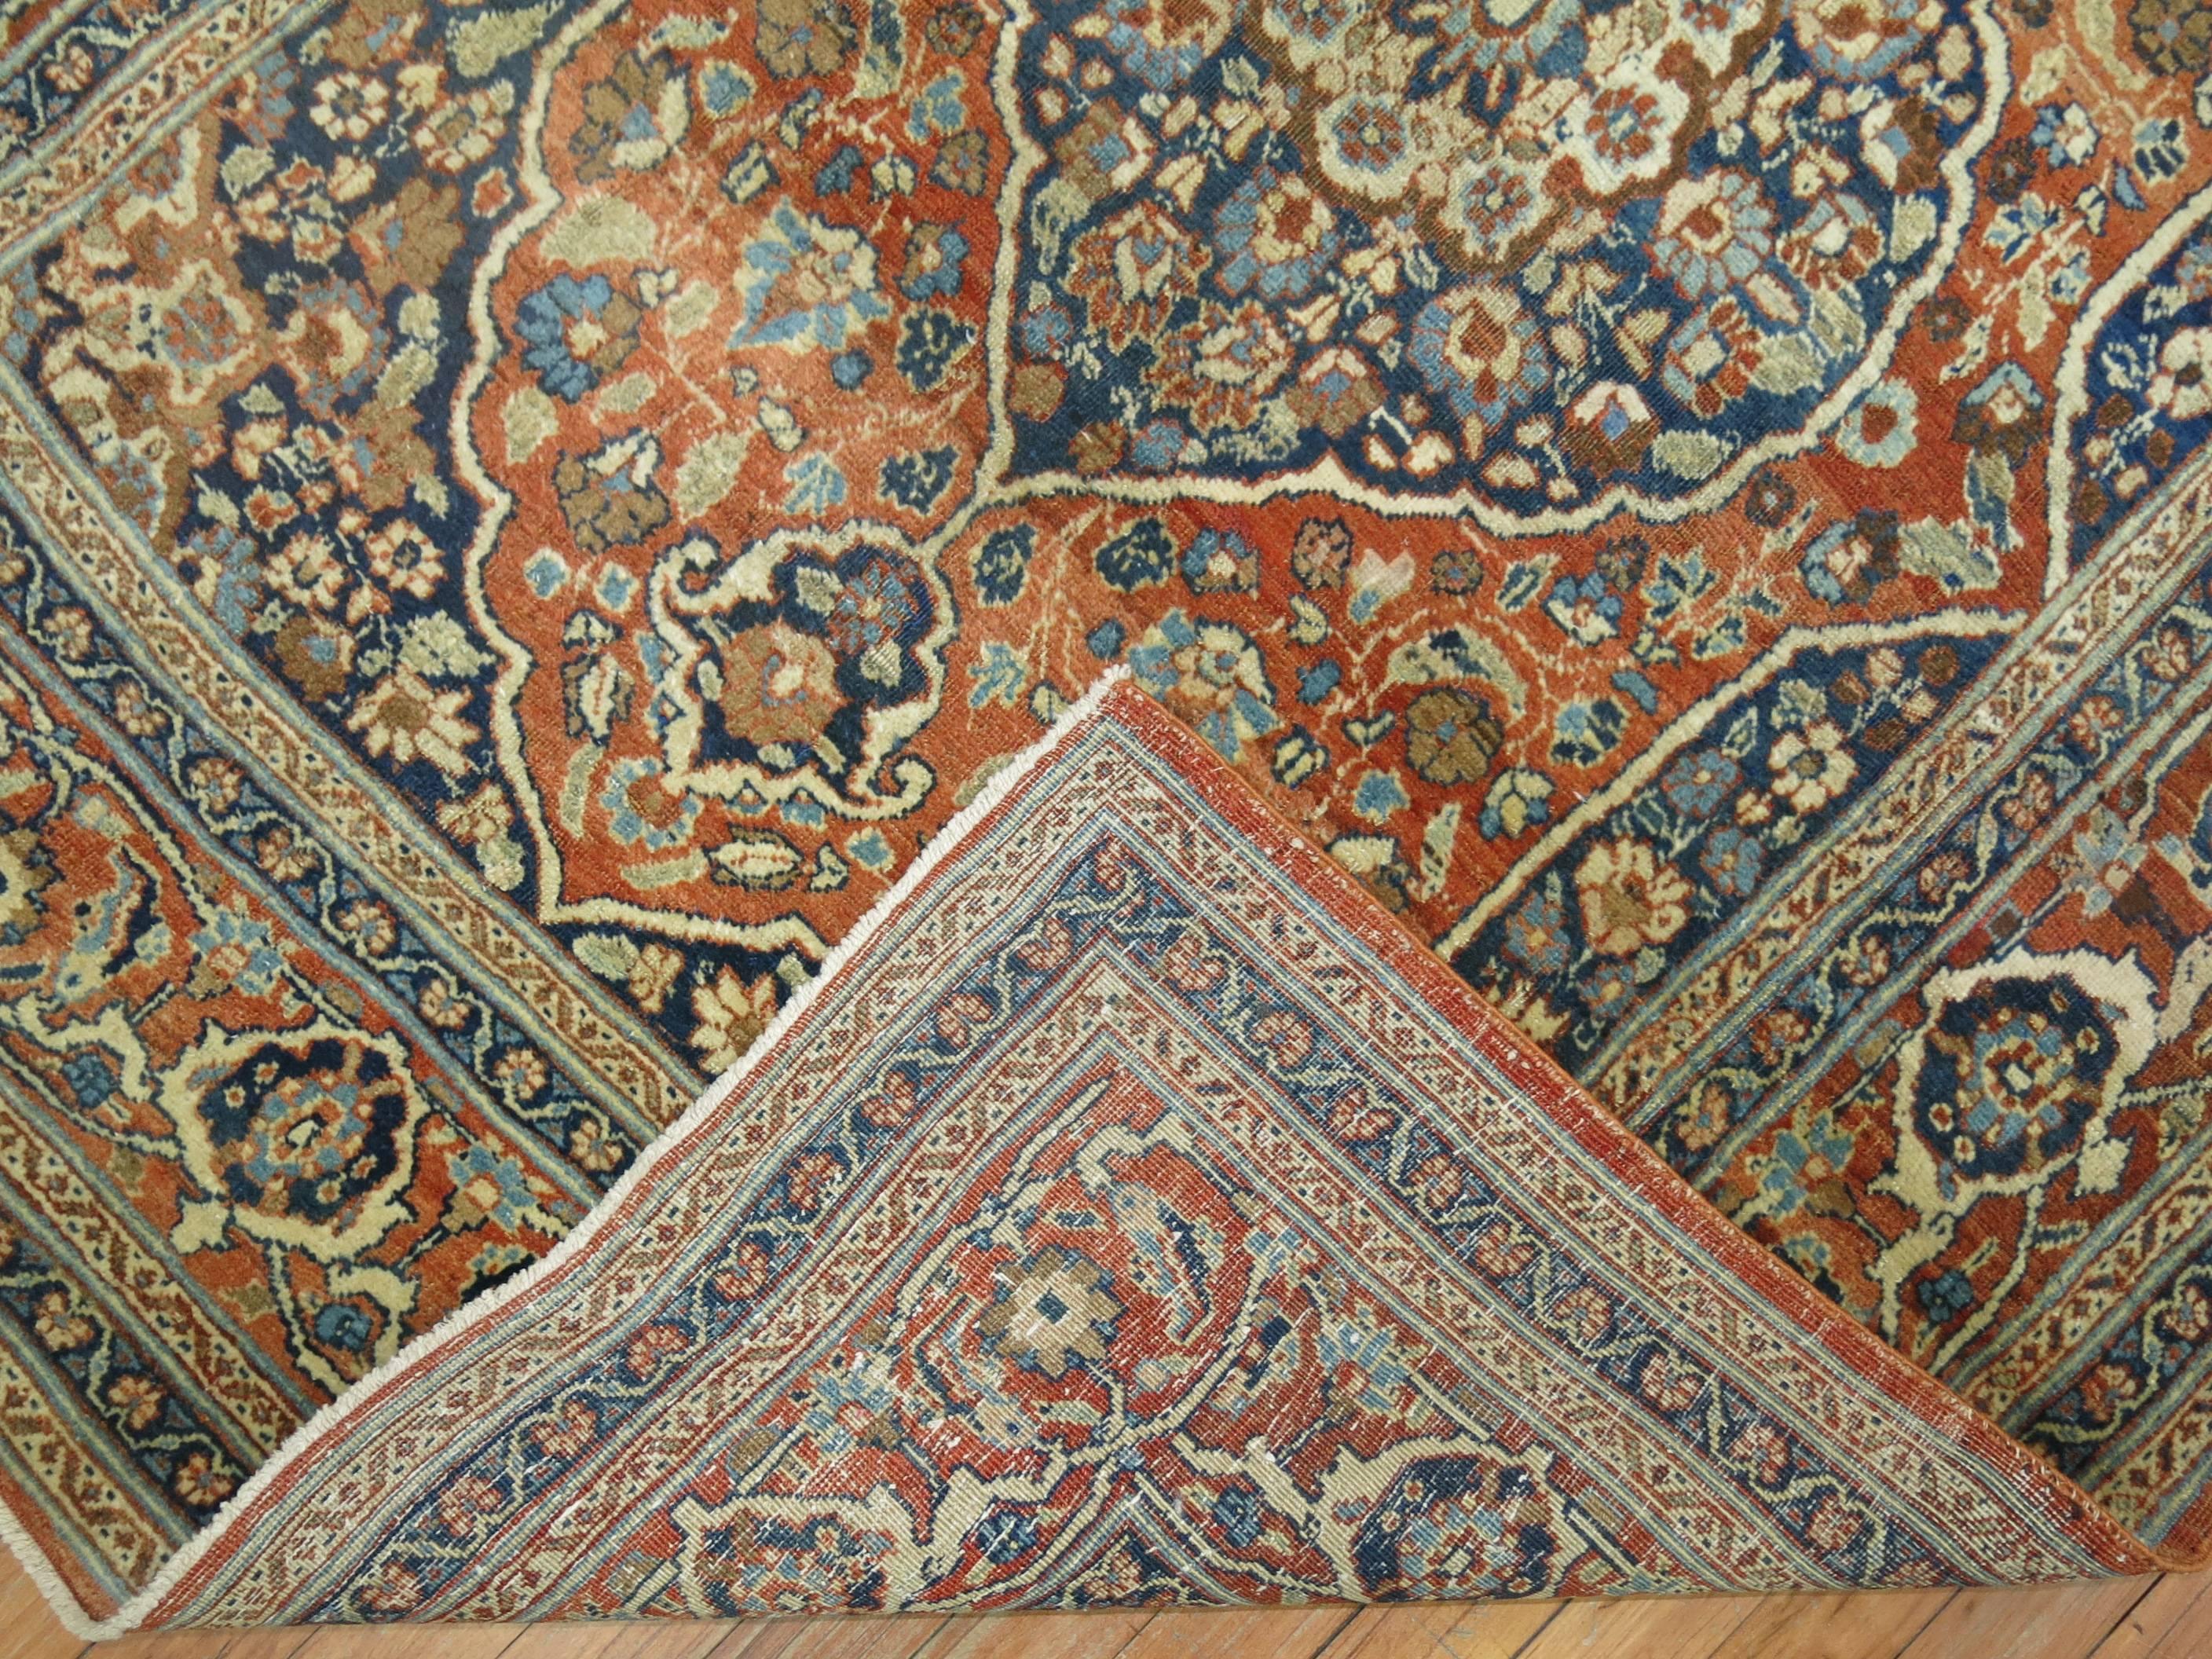 An authentic handmade Persian Tabriz rug in oranges and blues with Classic medallion and border.